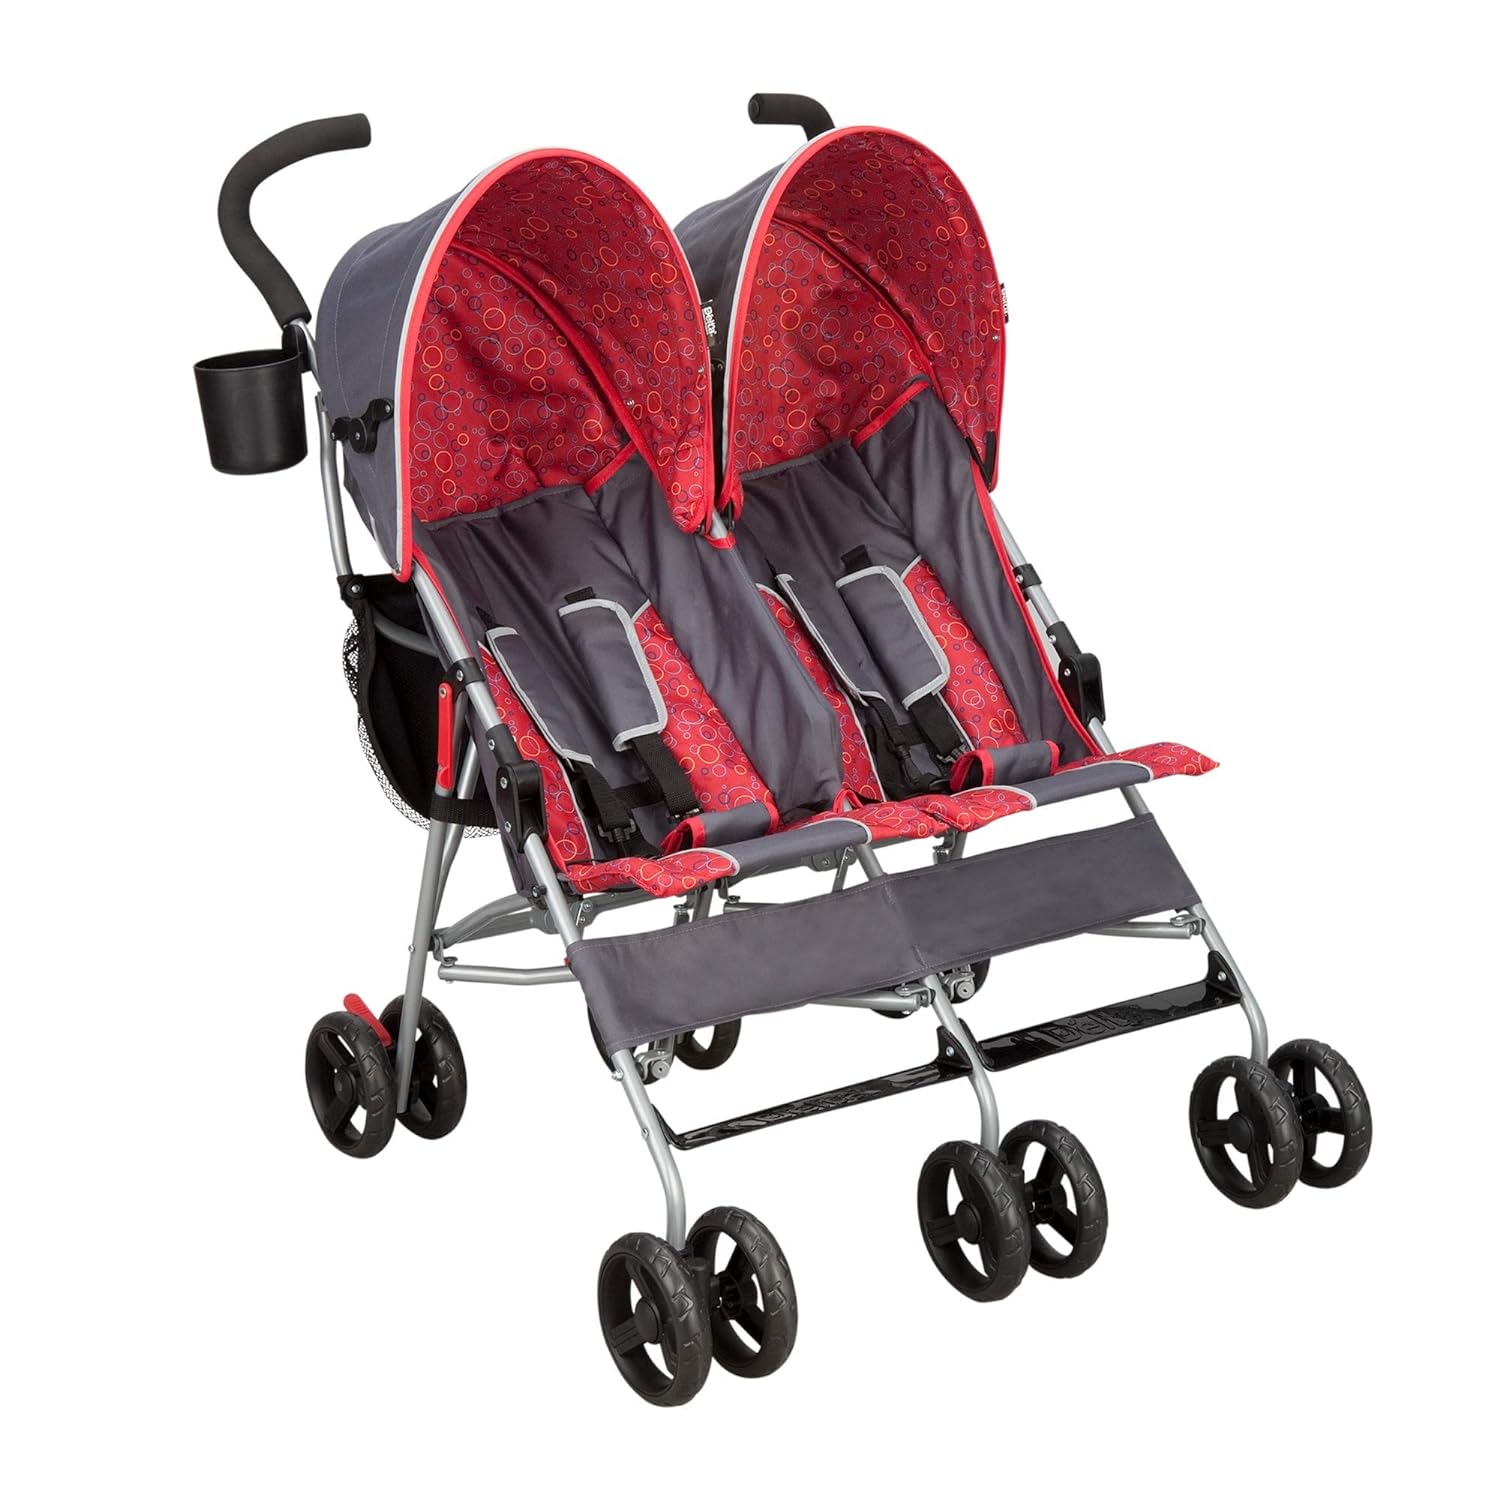 Delta Children LX Side by Side Stroller - with Recline, Storage & Compact Fold, Grey $74